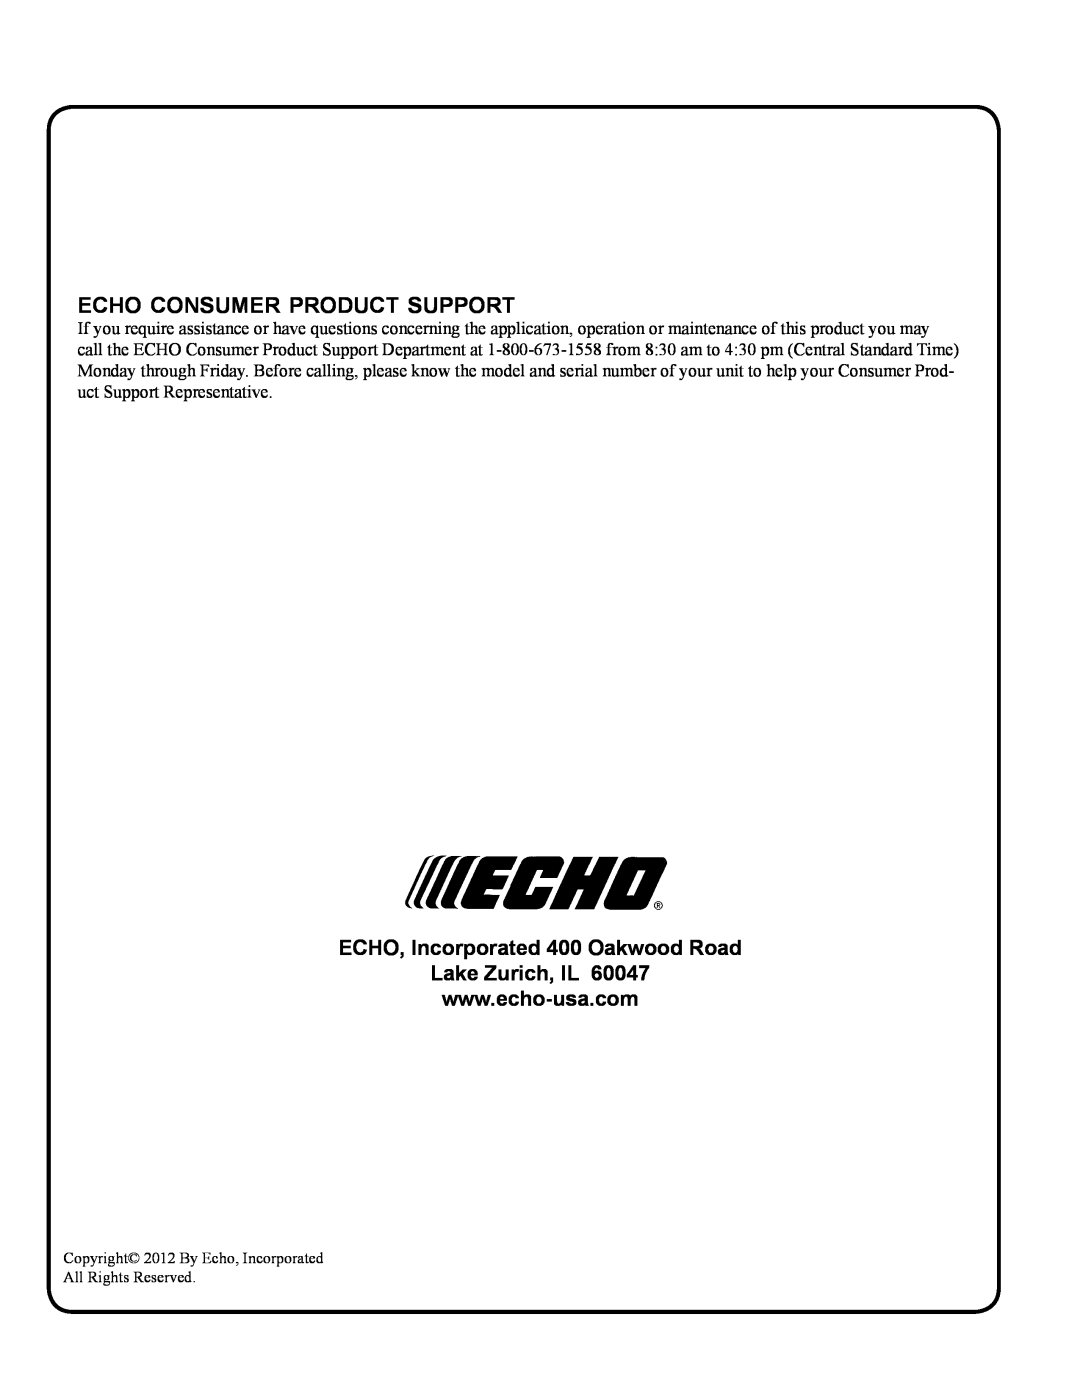 Echo PPT-280 X767000212, PPT-266/266H echo consumer product support, ECHO, Incorporated 400 Oakwood Road Lake Zurich, IL 